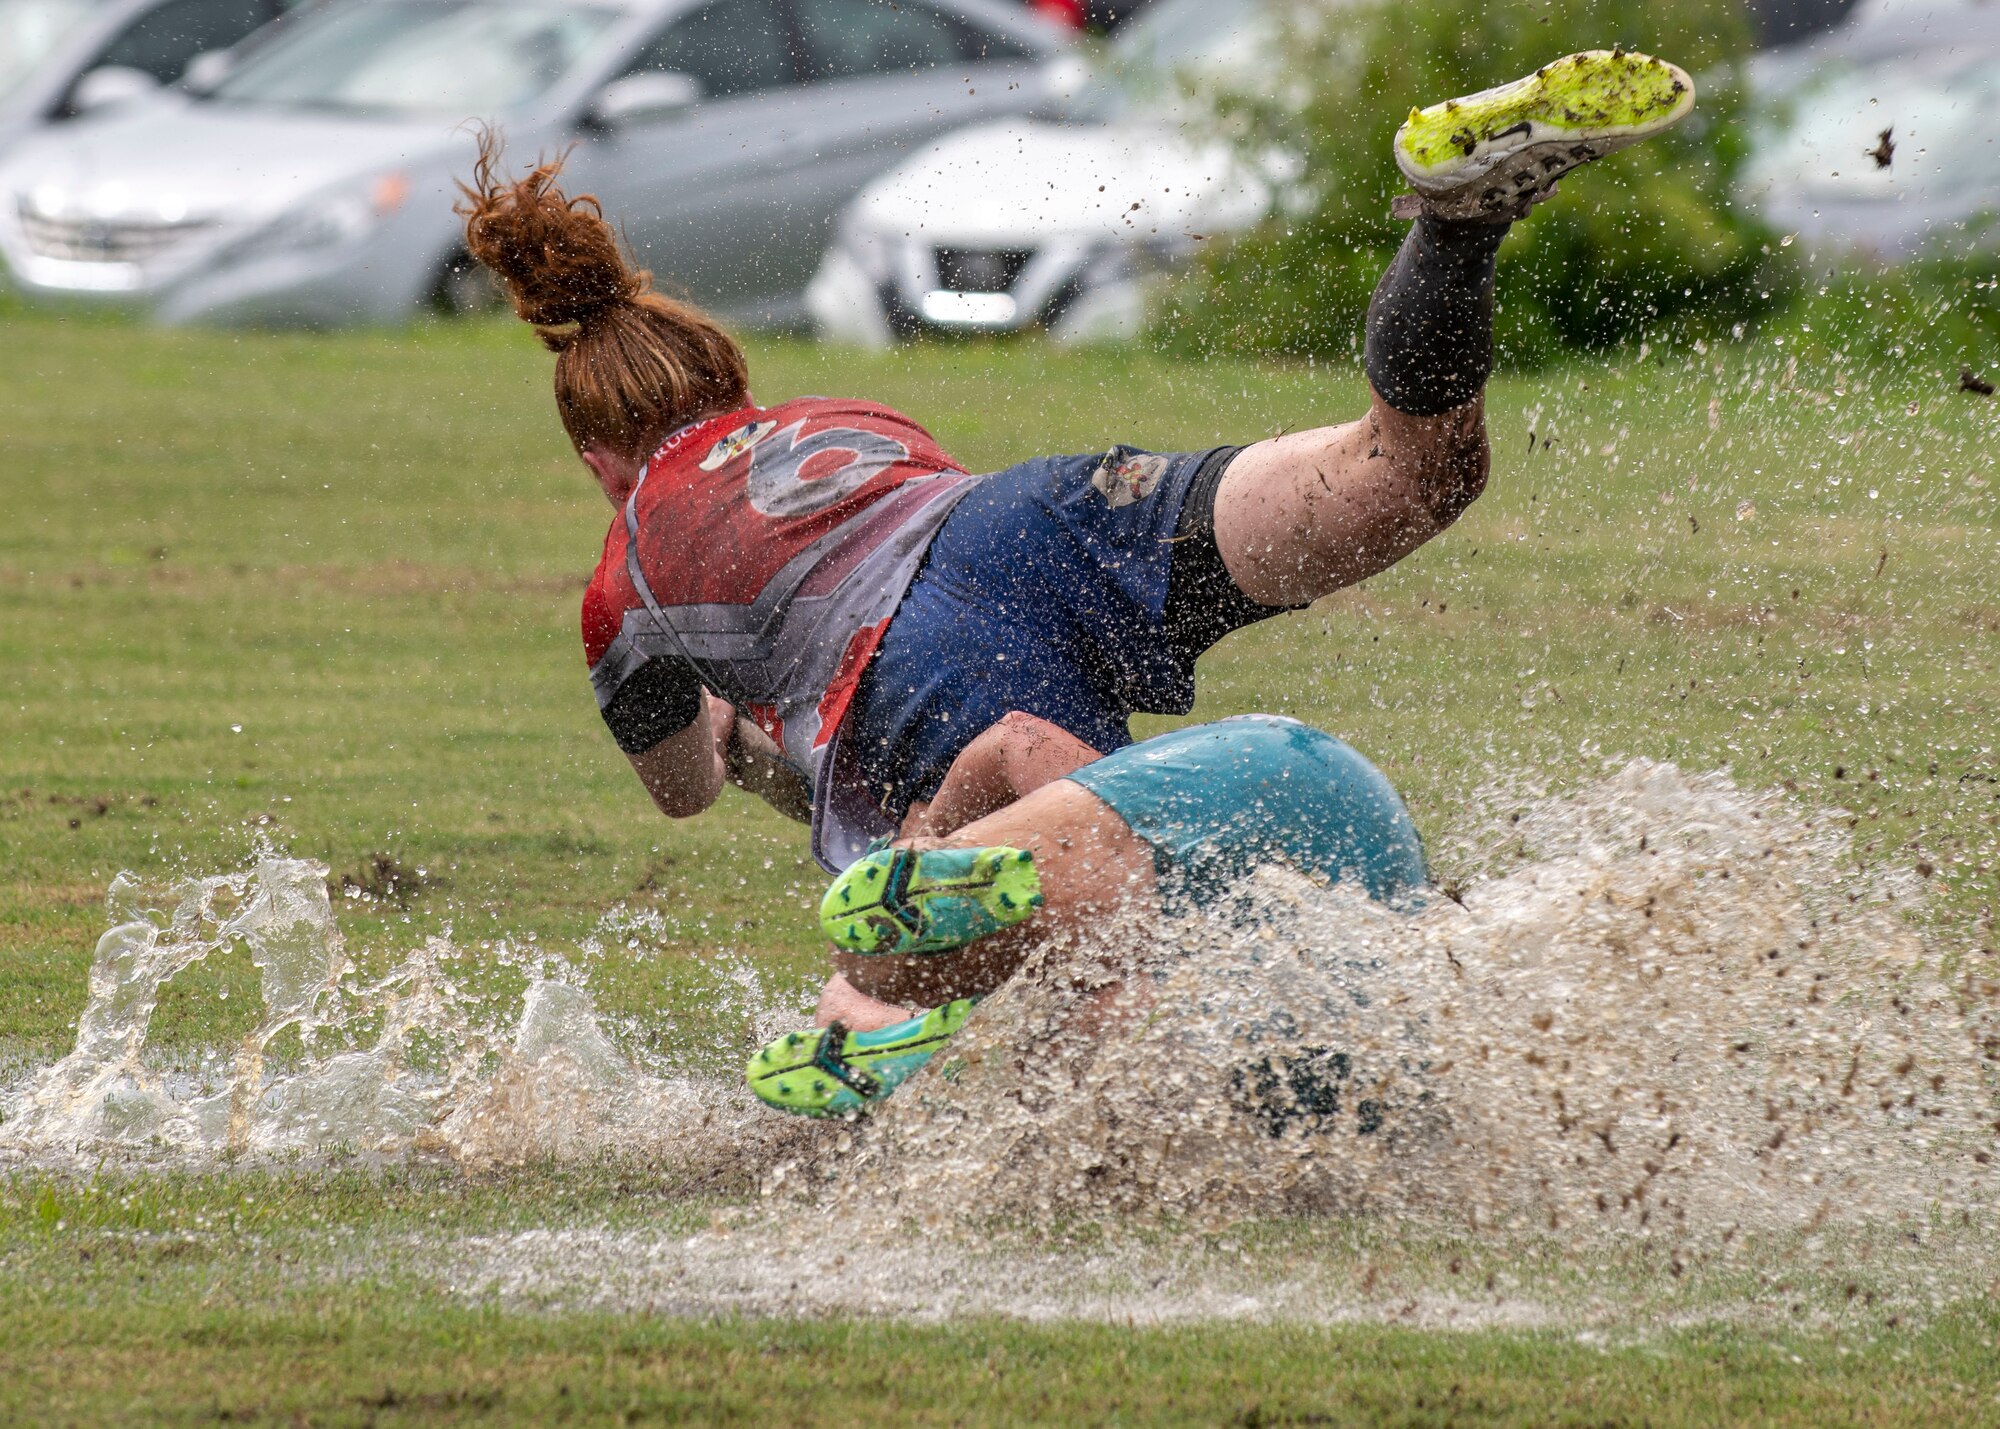 Master Sgt. Sahtara Wehe, a United States Air Force women’s rugby player, dives for the goal line at the Annual Armed Forces Women’s Rugby Championship in Wilmington, North Carolina, June 26, 2021.